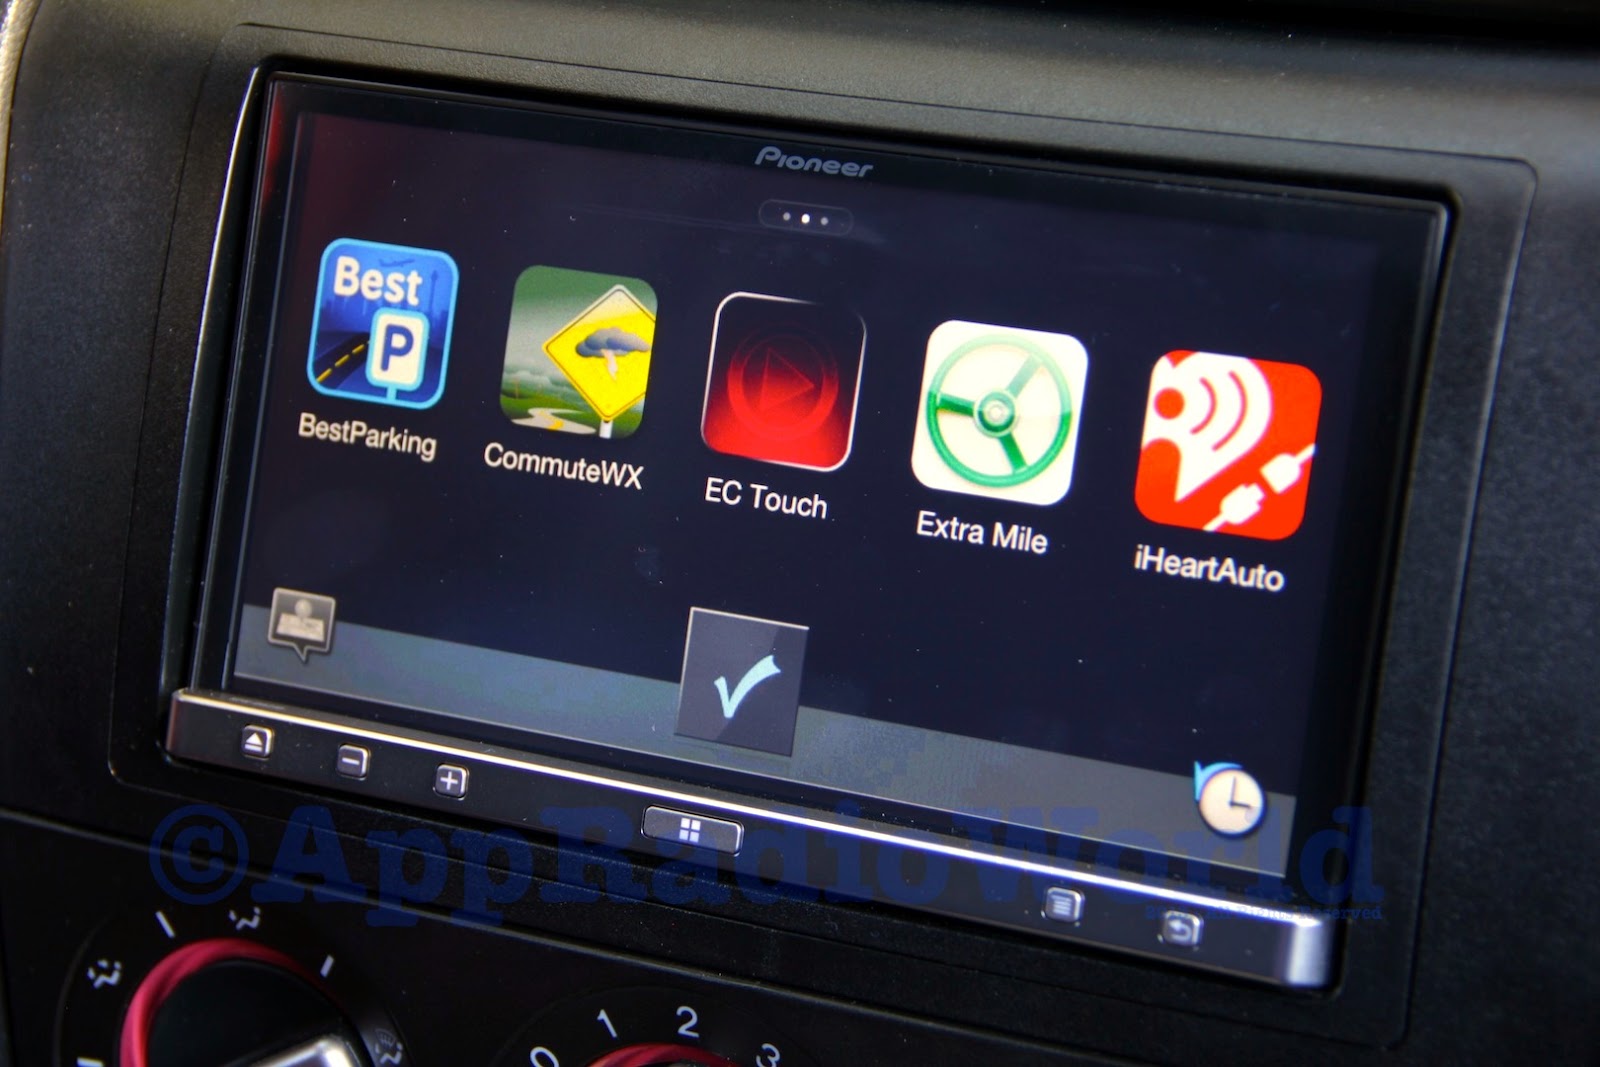 Voorwoord Grand zuiger AppRadioWorld - Apple CarPlay, Android Auto, Car Technology News: Pioneer  AppRadio 3 (SPH-DA210) Review: Some Things Old, Some Things New!